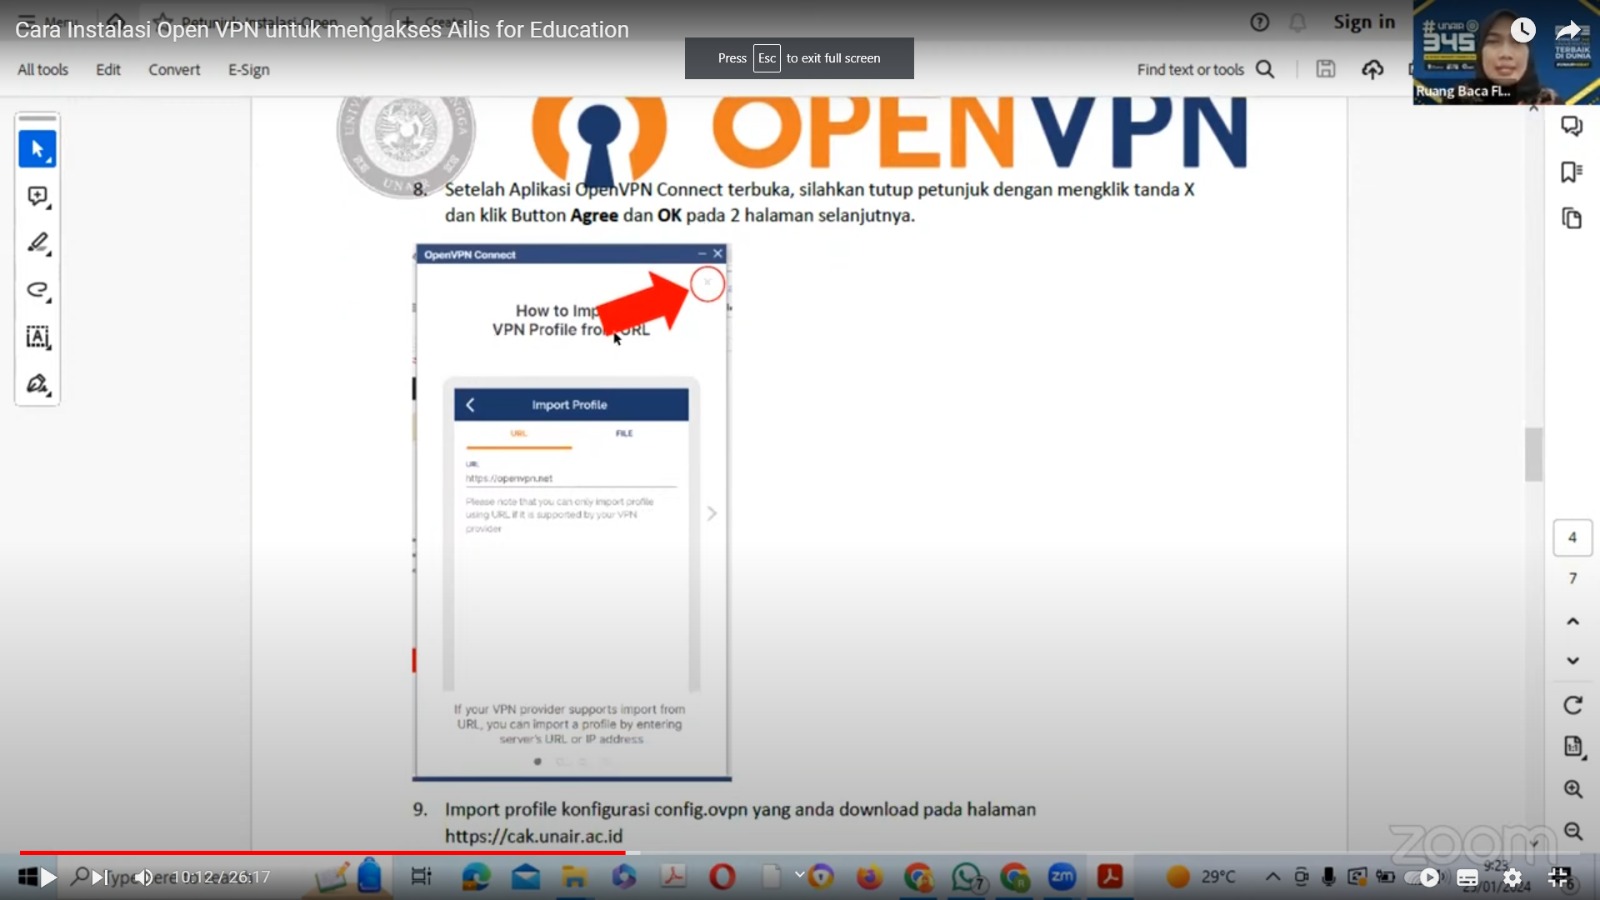 OpenVPN Installation Steps to Access Ailist for Education